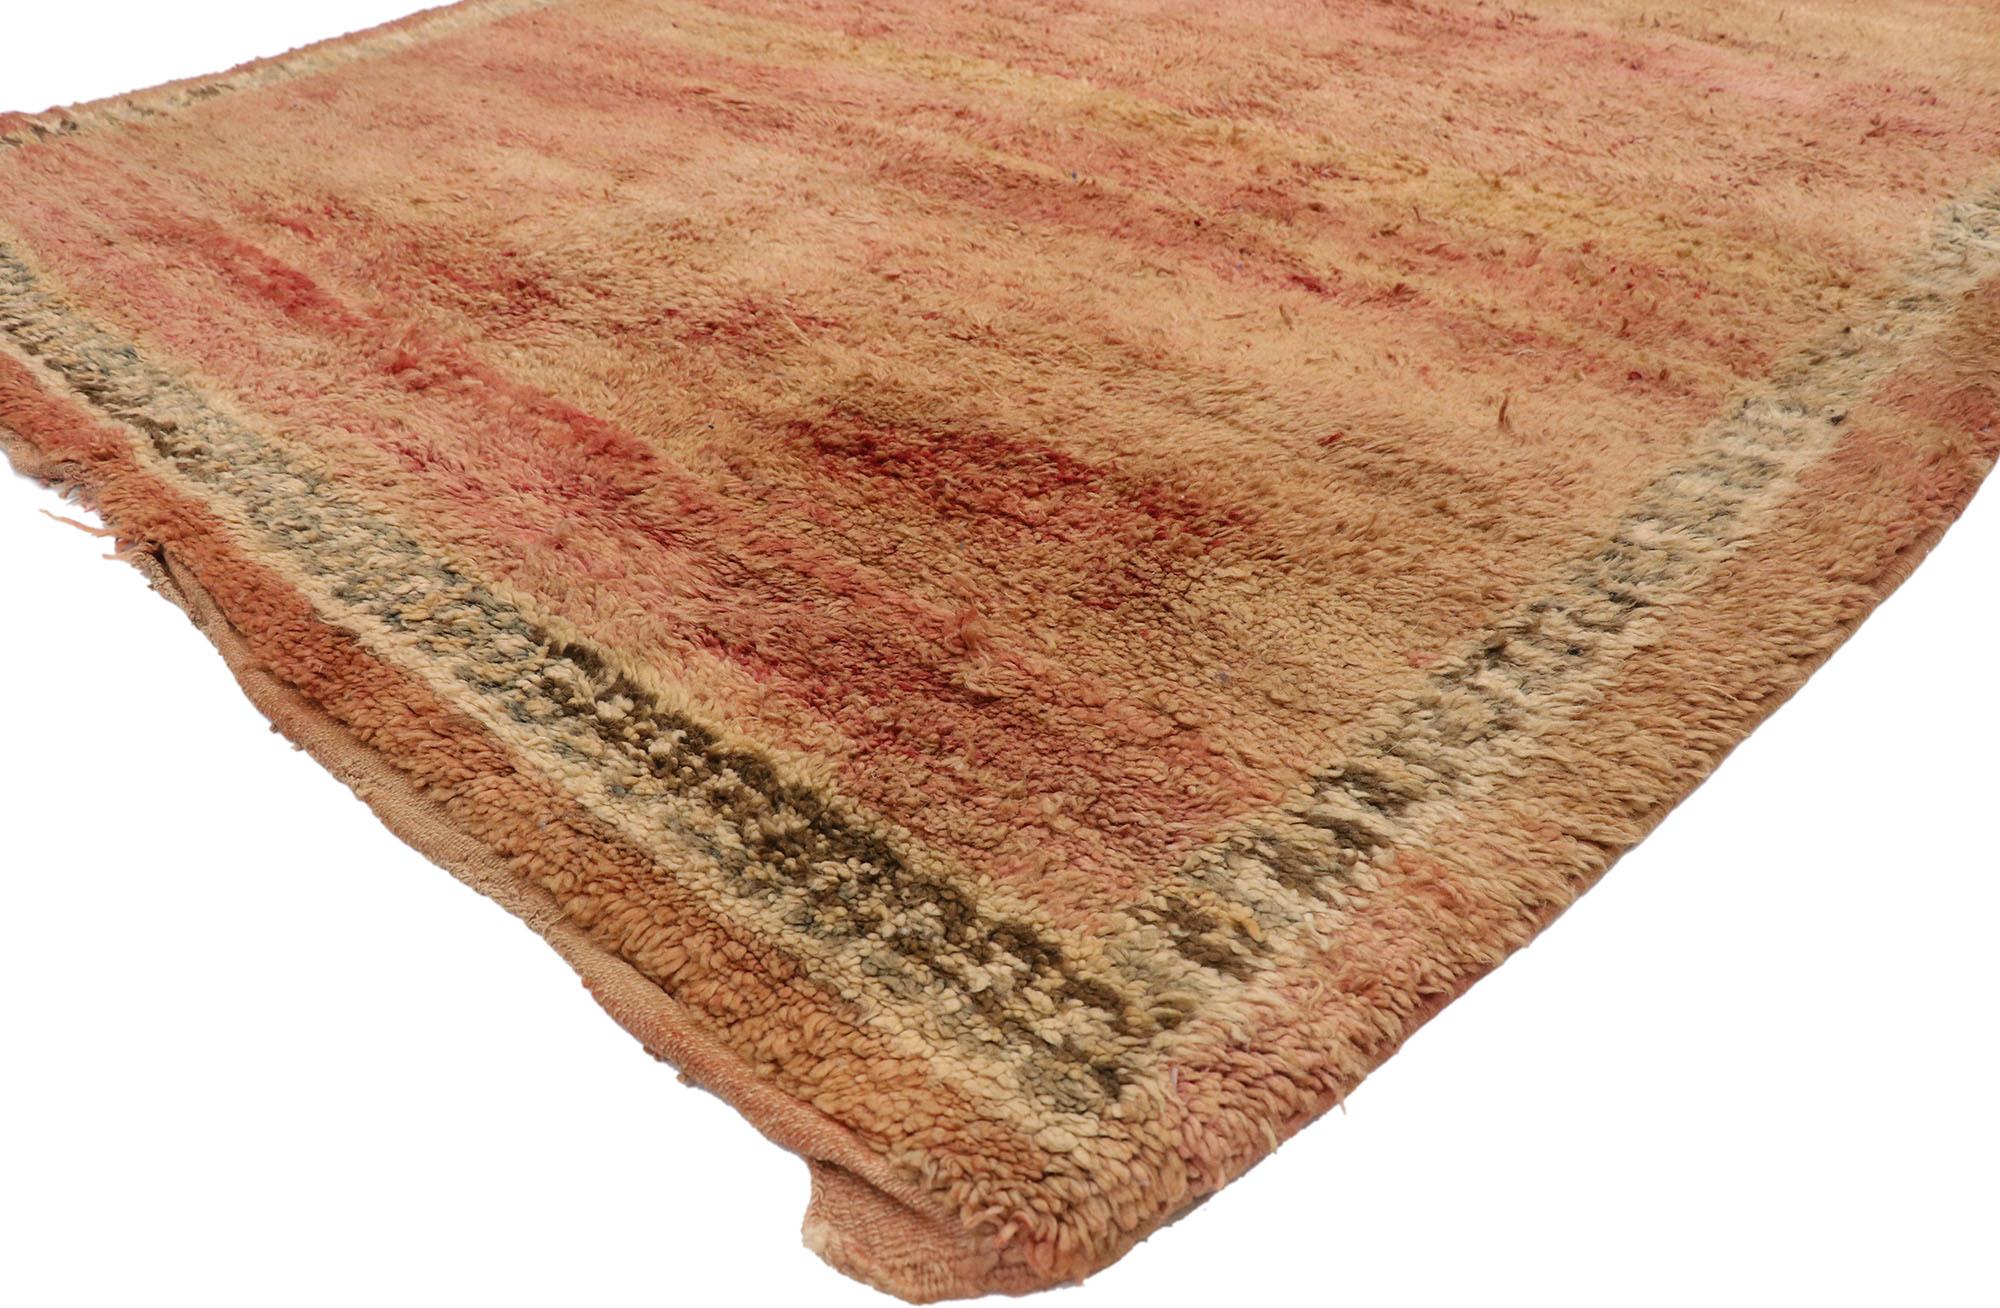 20907, vintage Berber Moroccan rug with Warm, rustic Mid-Century Modern style. This hand knotted wool vintage Berber Moroccan rug emanates function and versatility while staying true to the authentic spirit of Berber Tribe culture. Featuring earthy